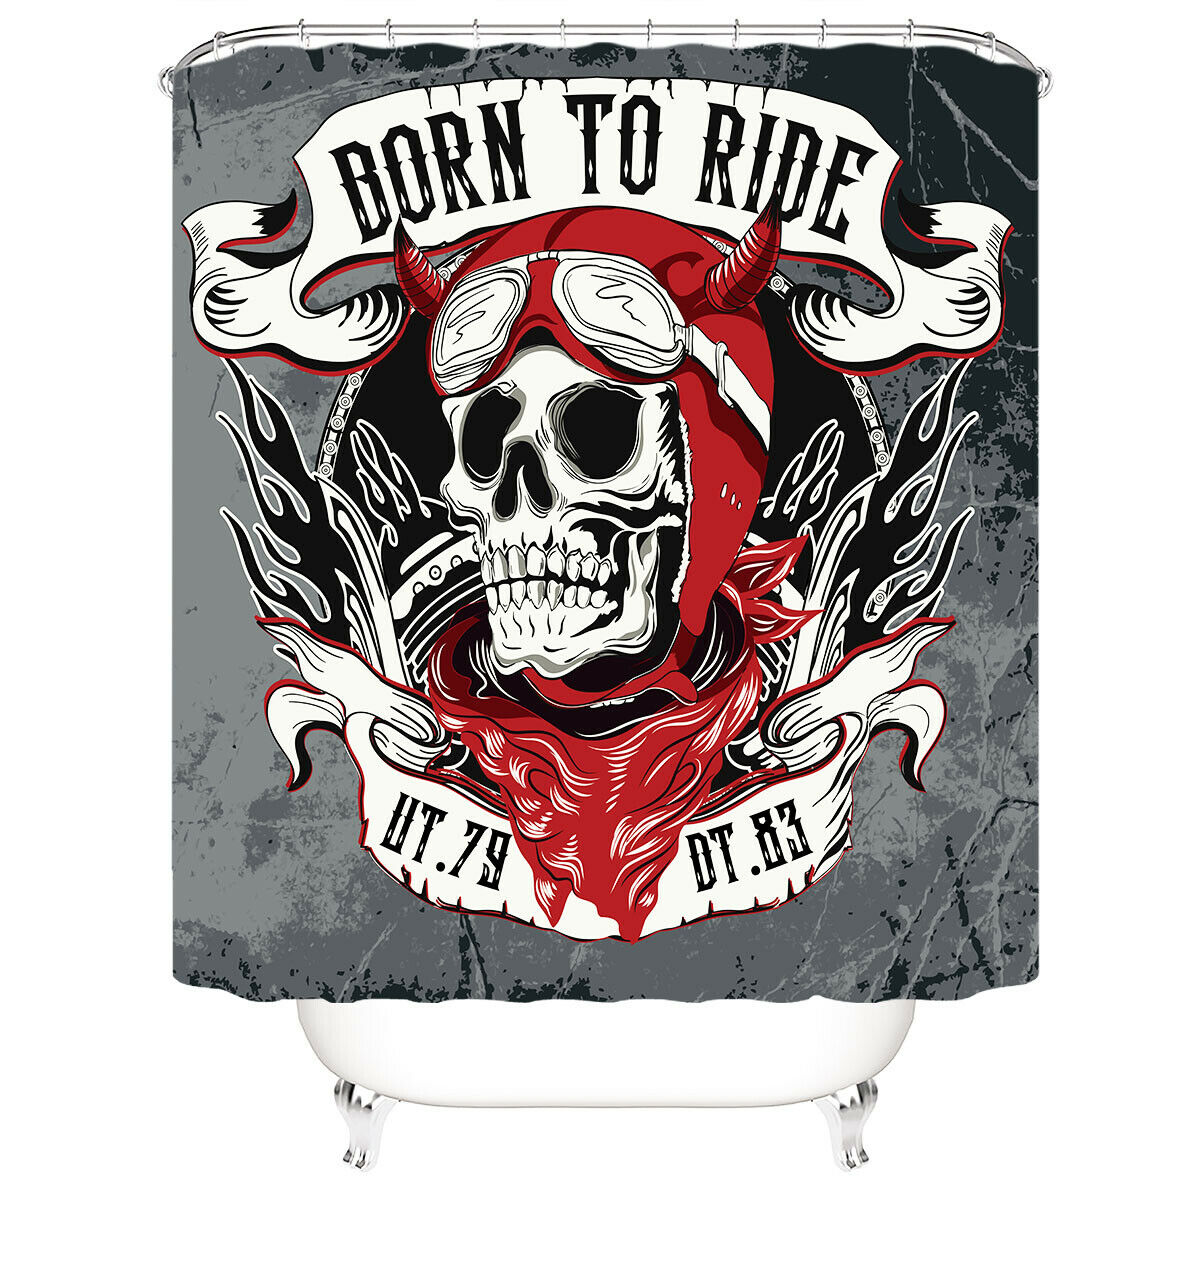 Born To Ride Shower Curtain Bathroom Rug Set Thick Bath Mat Toilet Lid Cover-180×180cm Shower Curtain Only-Free Shipping at meselling99